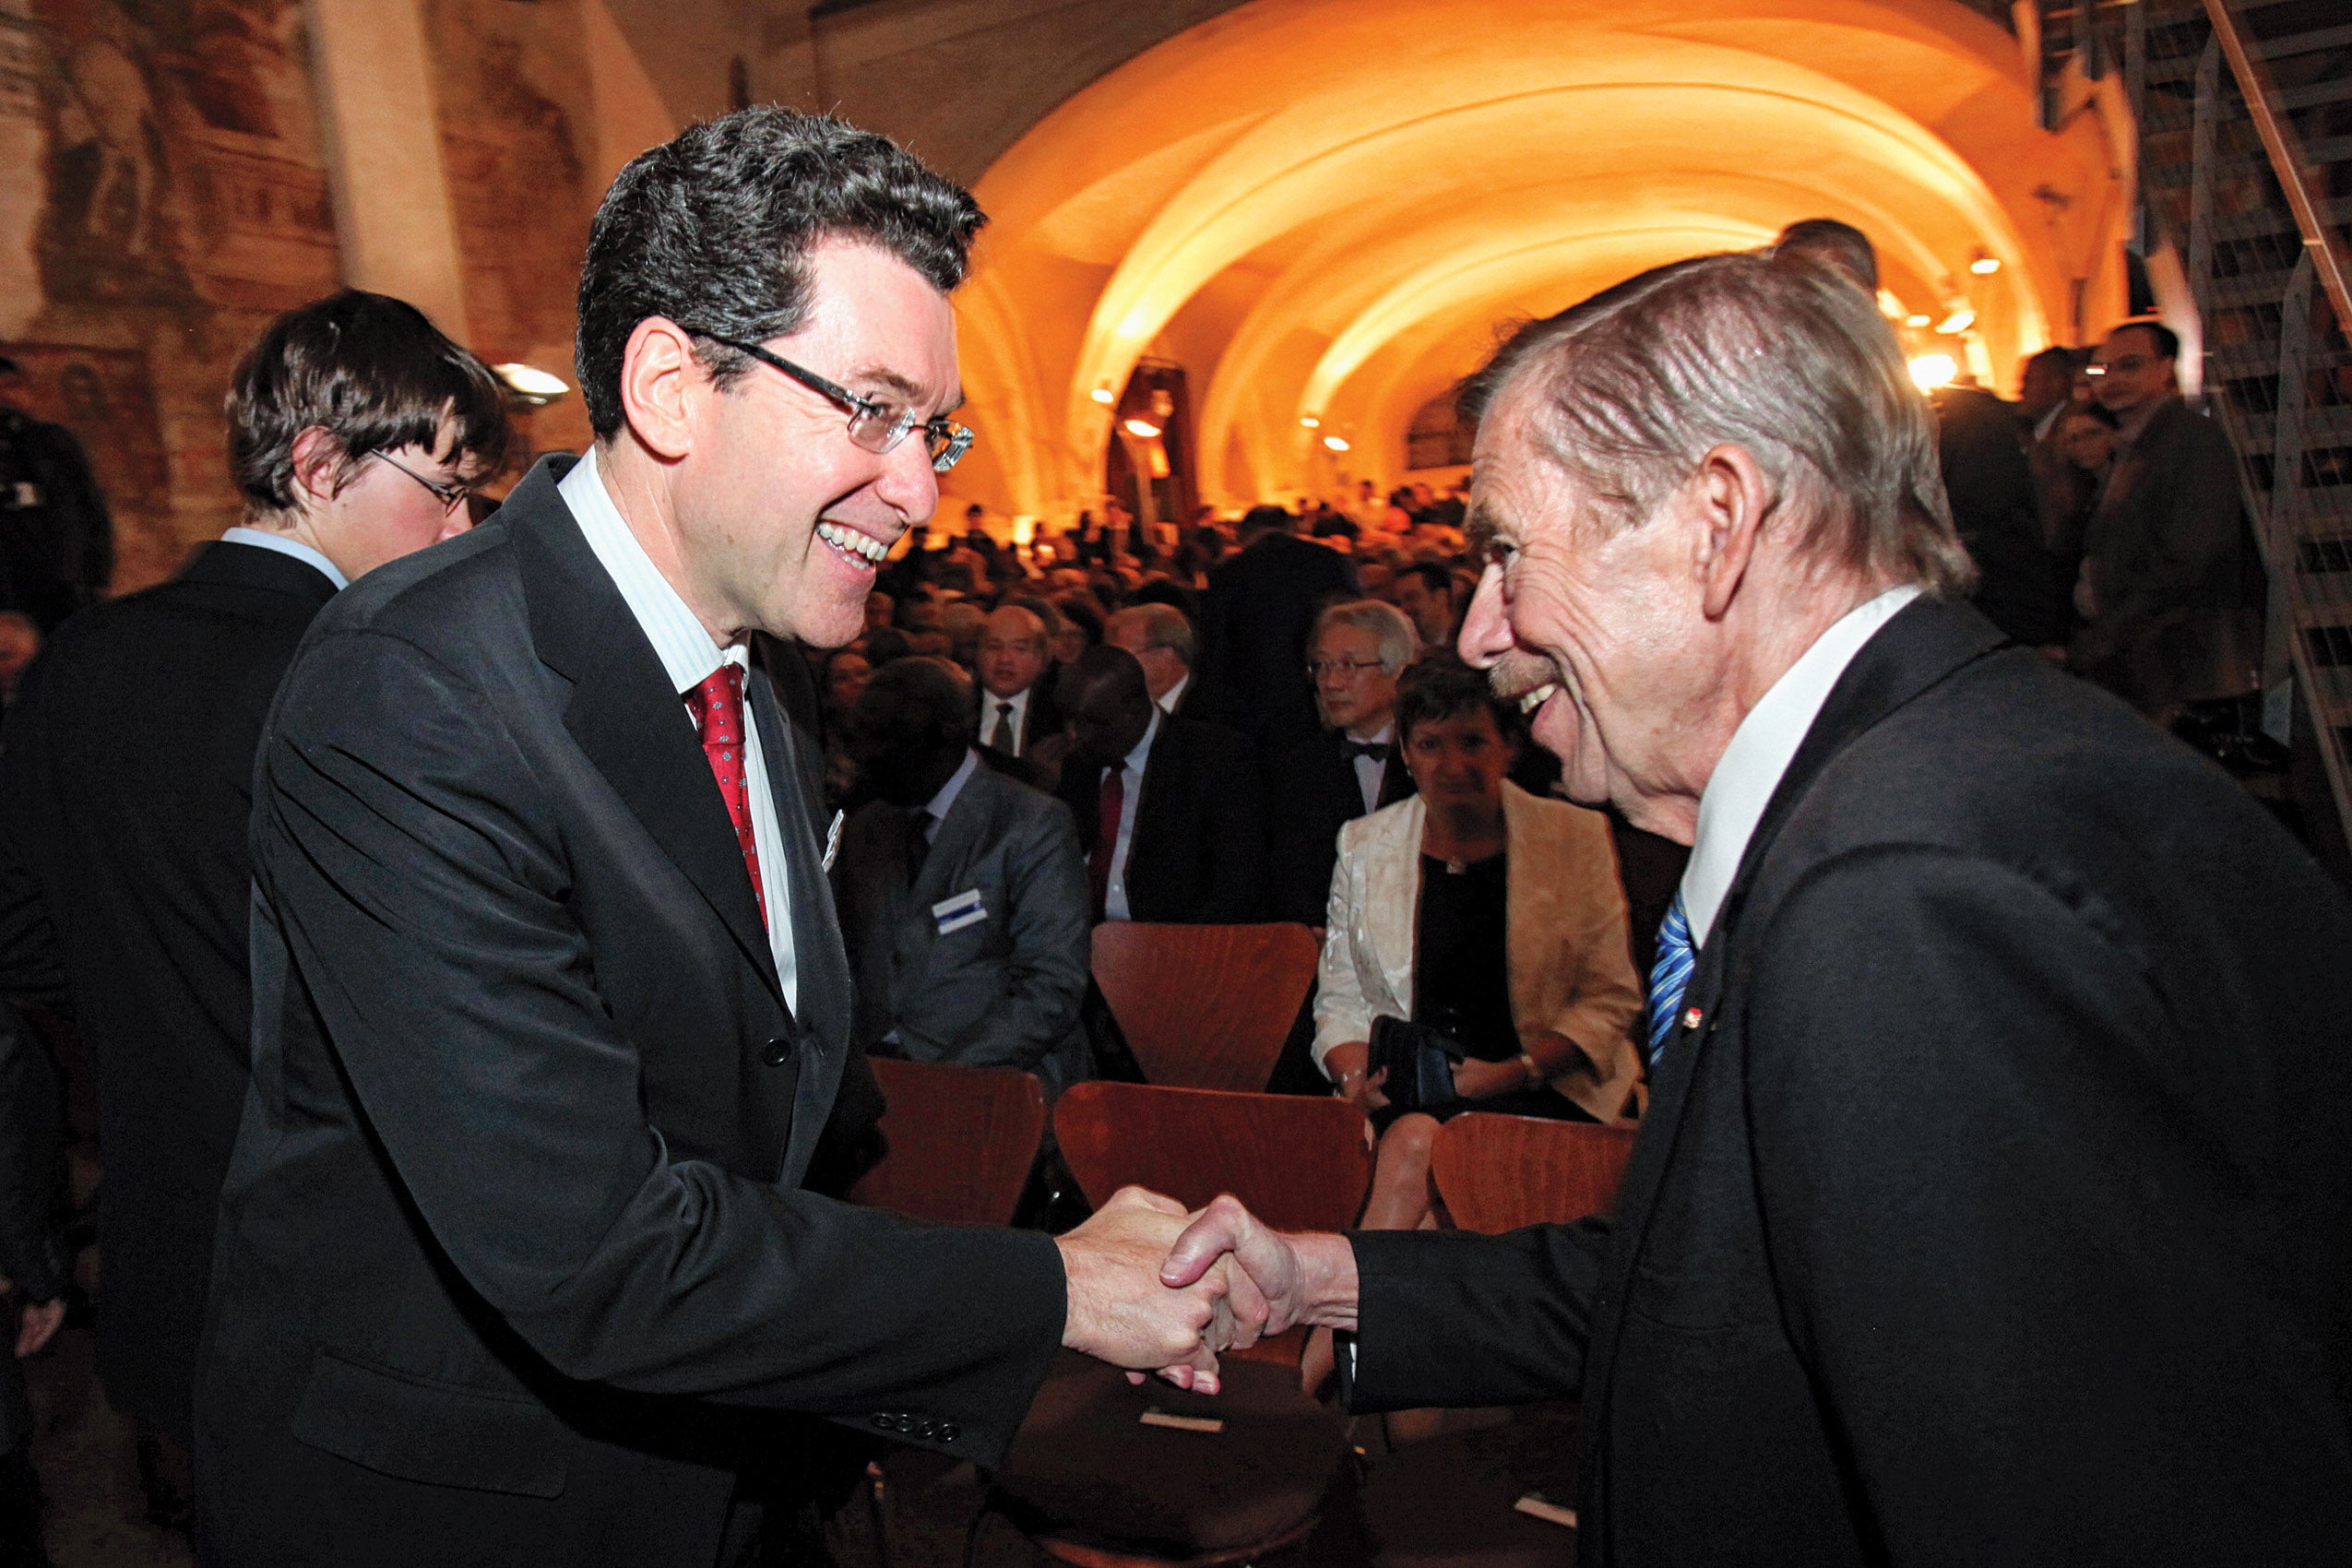 Norman Eisen shaking hands with Vaclav Havel at an indoor event